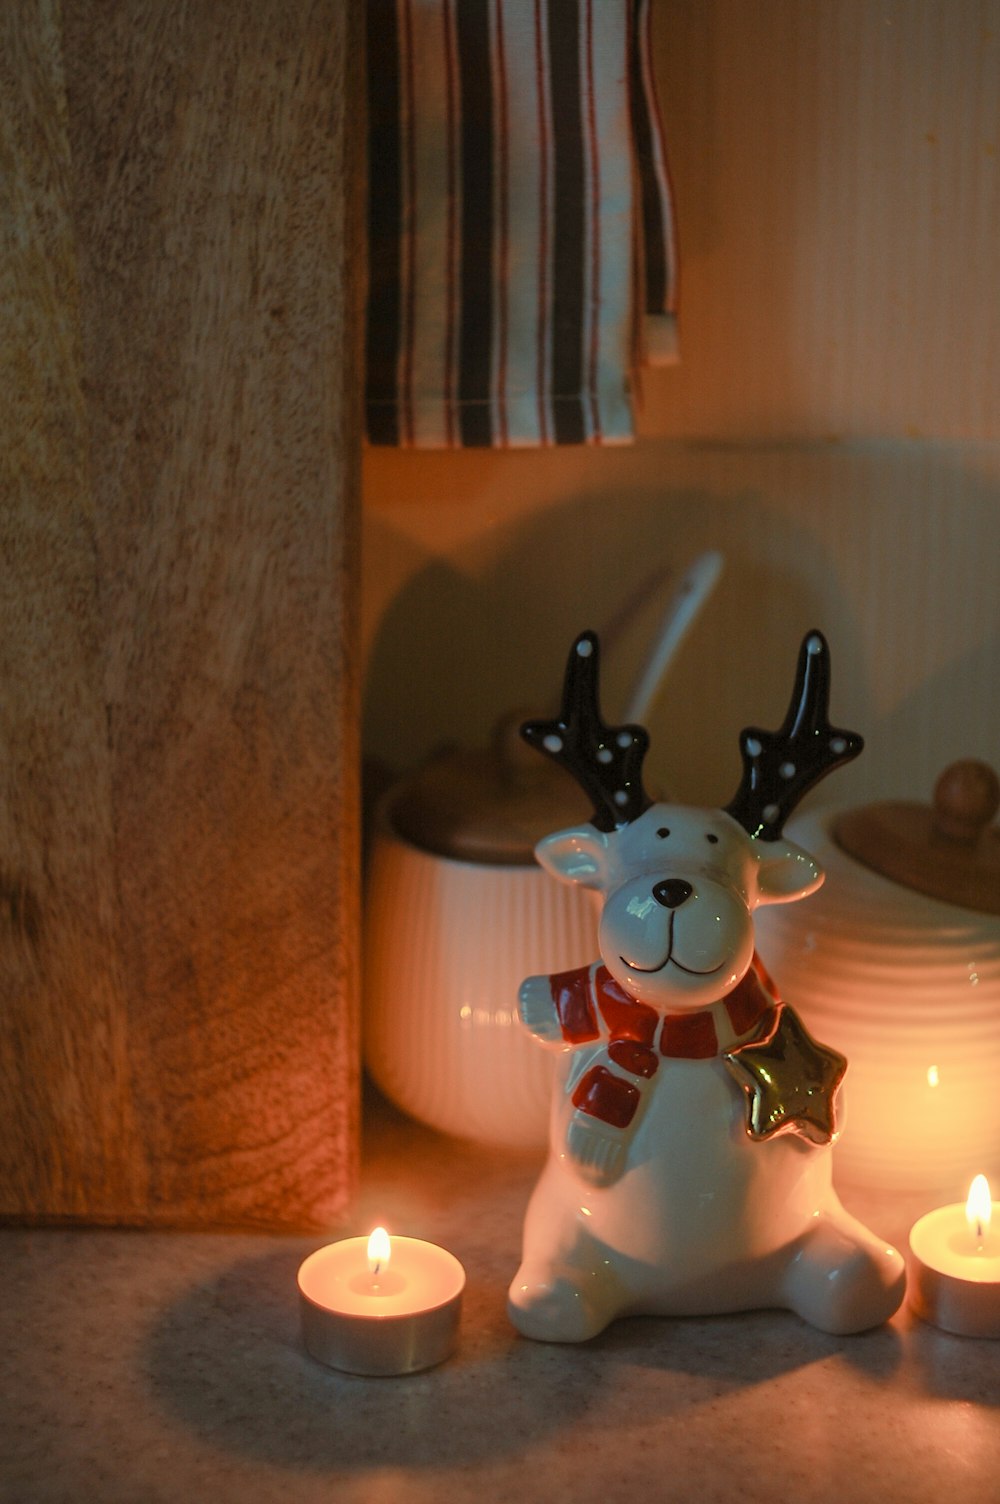 a white reindeer figurine sitting next to two lit candles